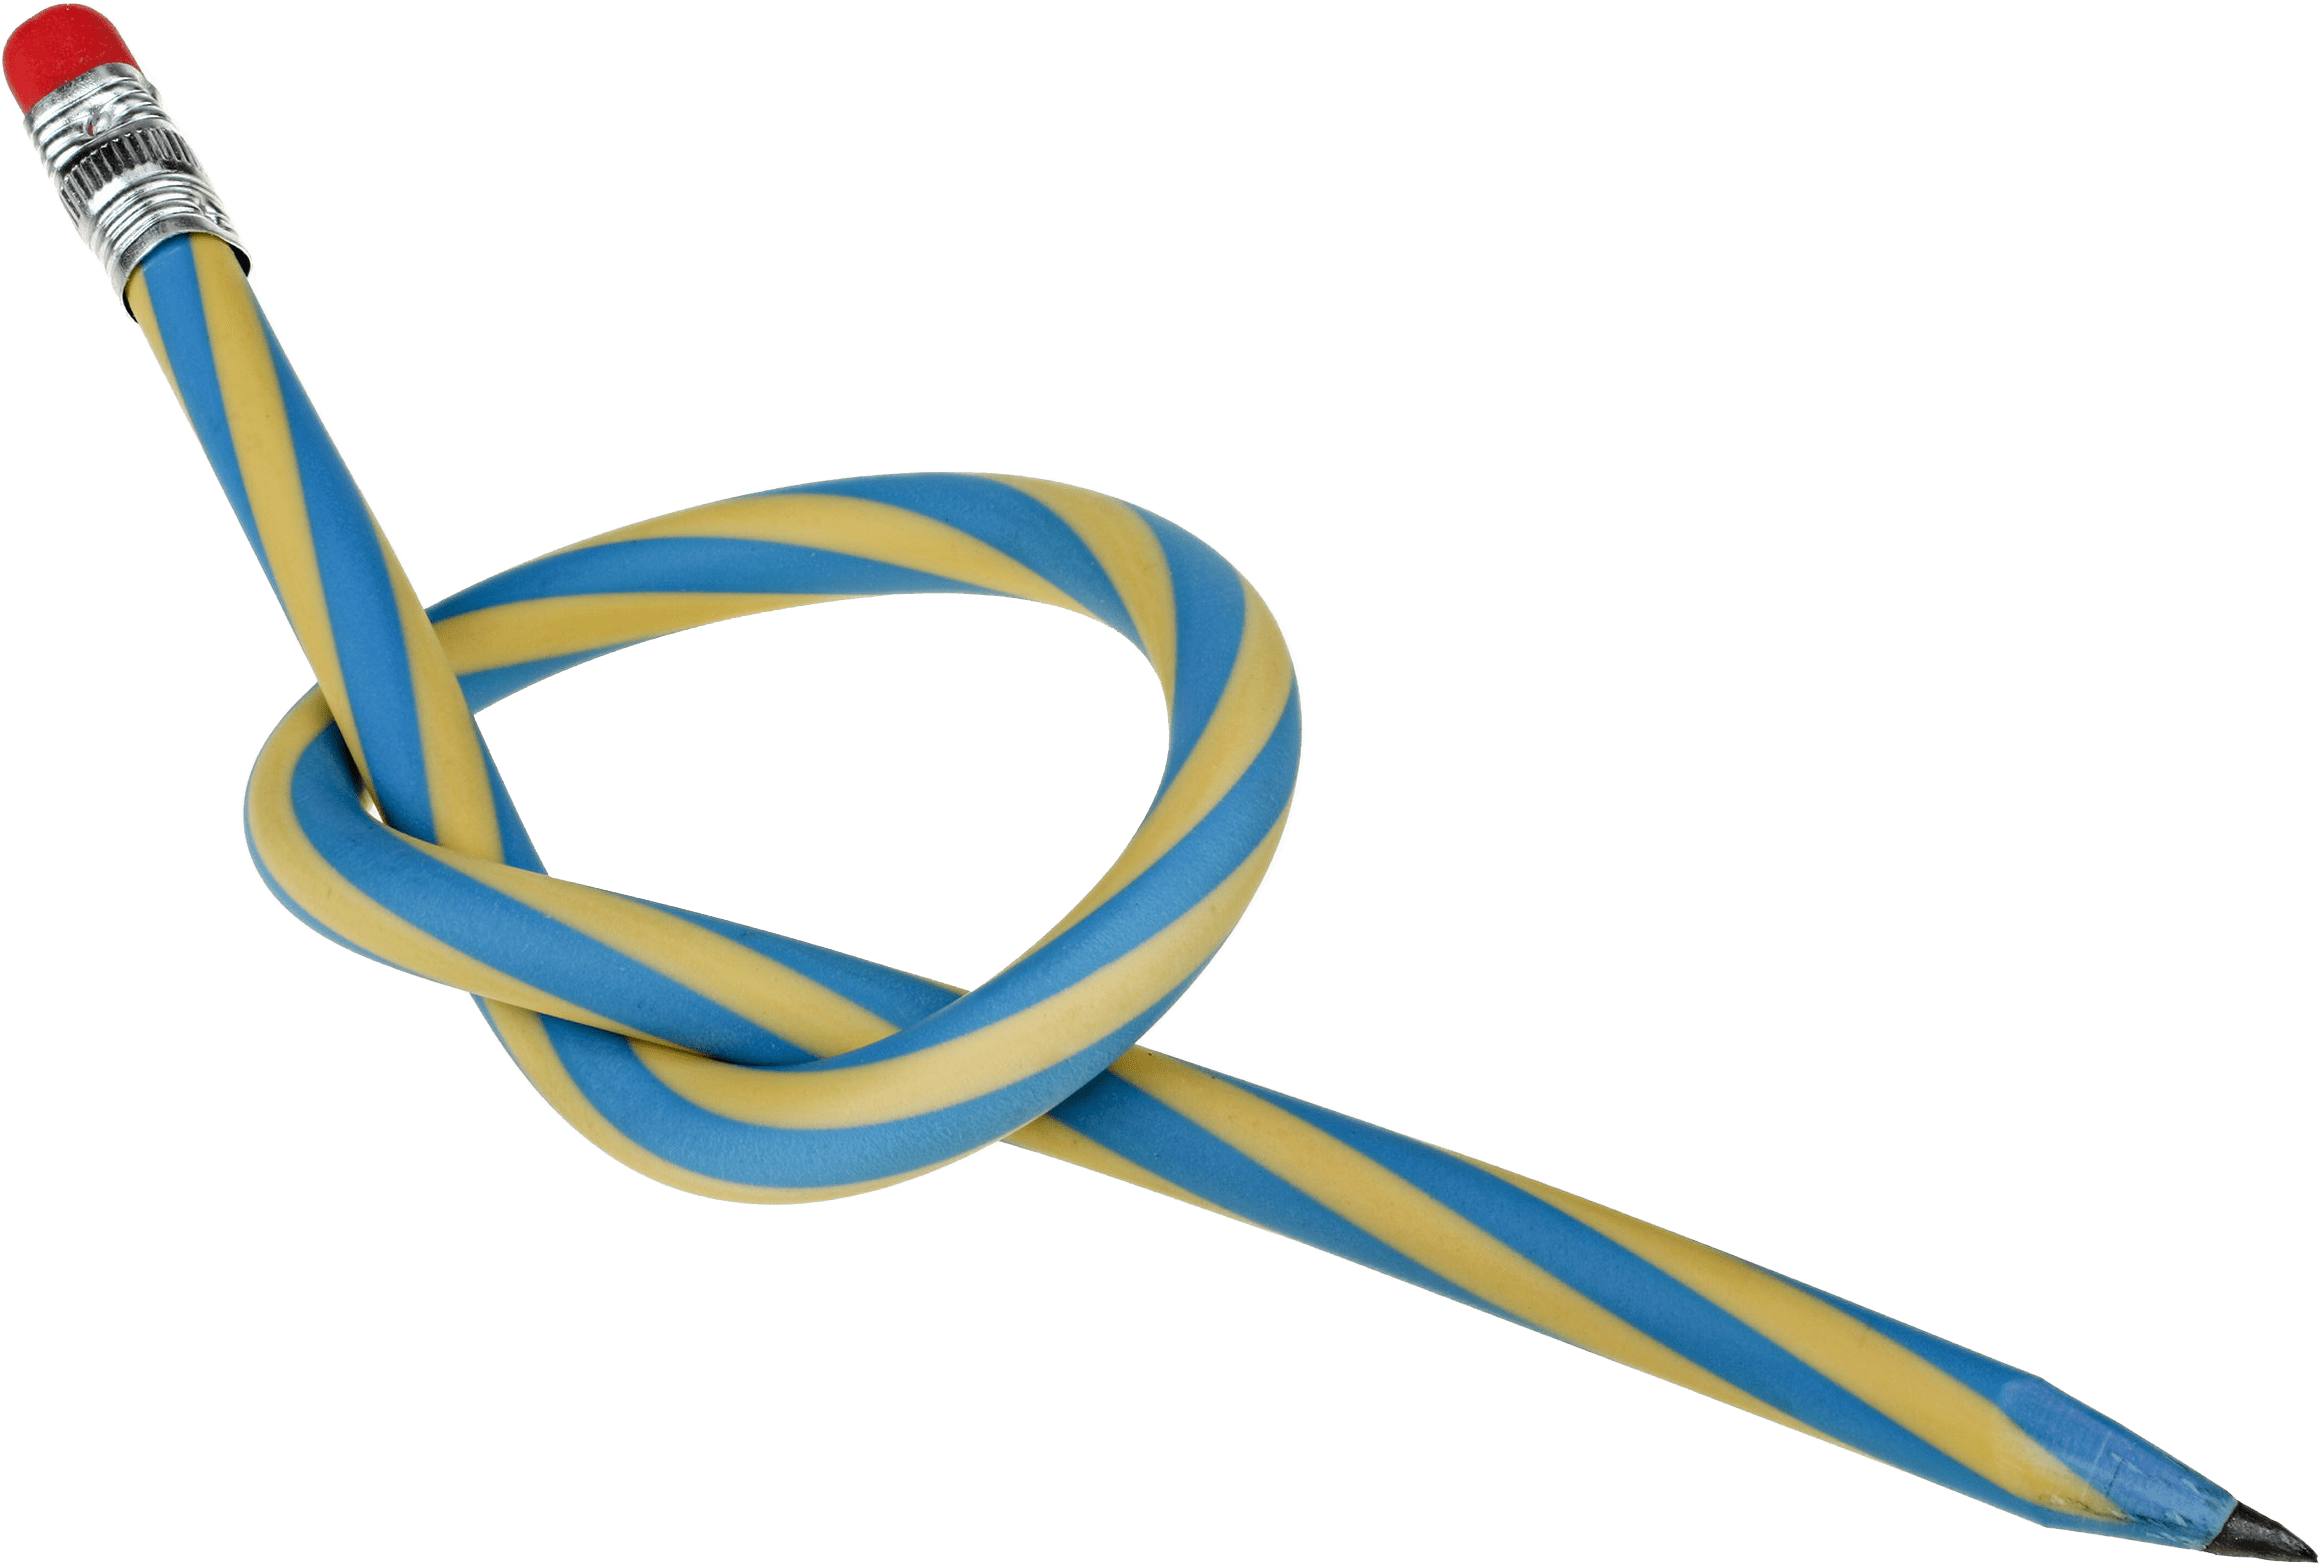 Striped pencil twisted in knot.